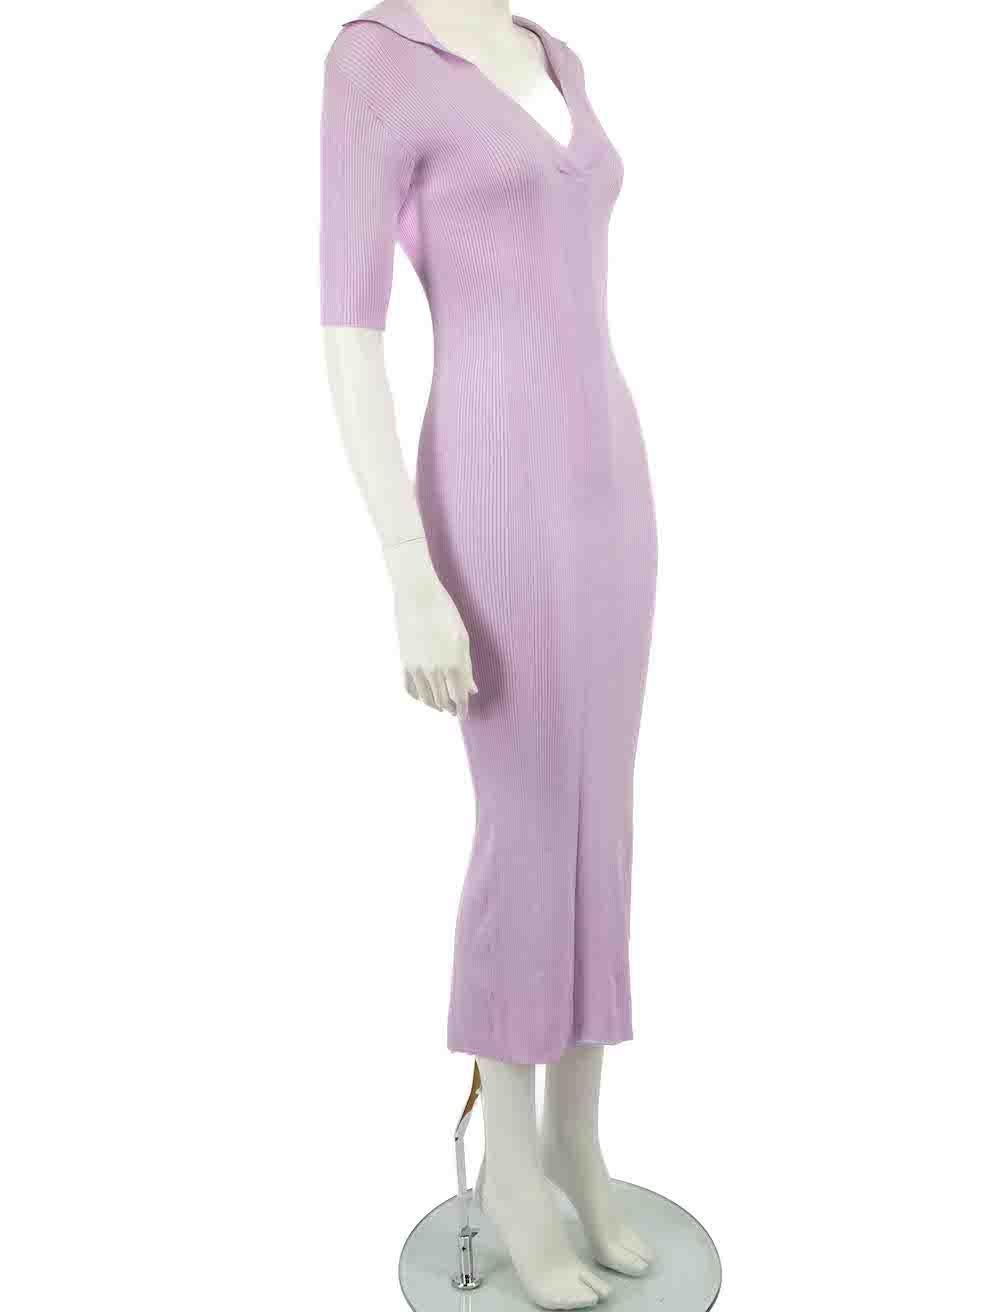 CONDITION is Very good. Hardly any visible wear to dress is evident on this used Remain Birger Christensen designer resale item.
 
 
 
 Details
 
 
 
 
 Joy S/S
 
 Purple
 
 Viscose
 
 Knit dress
 
 Midi
 
 Short sleeves
 
 Stretchy
 
 Figure